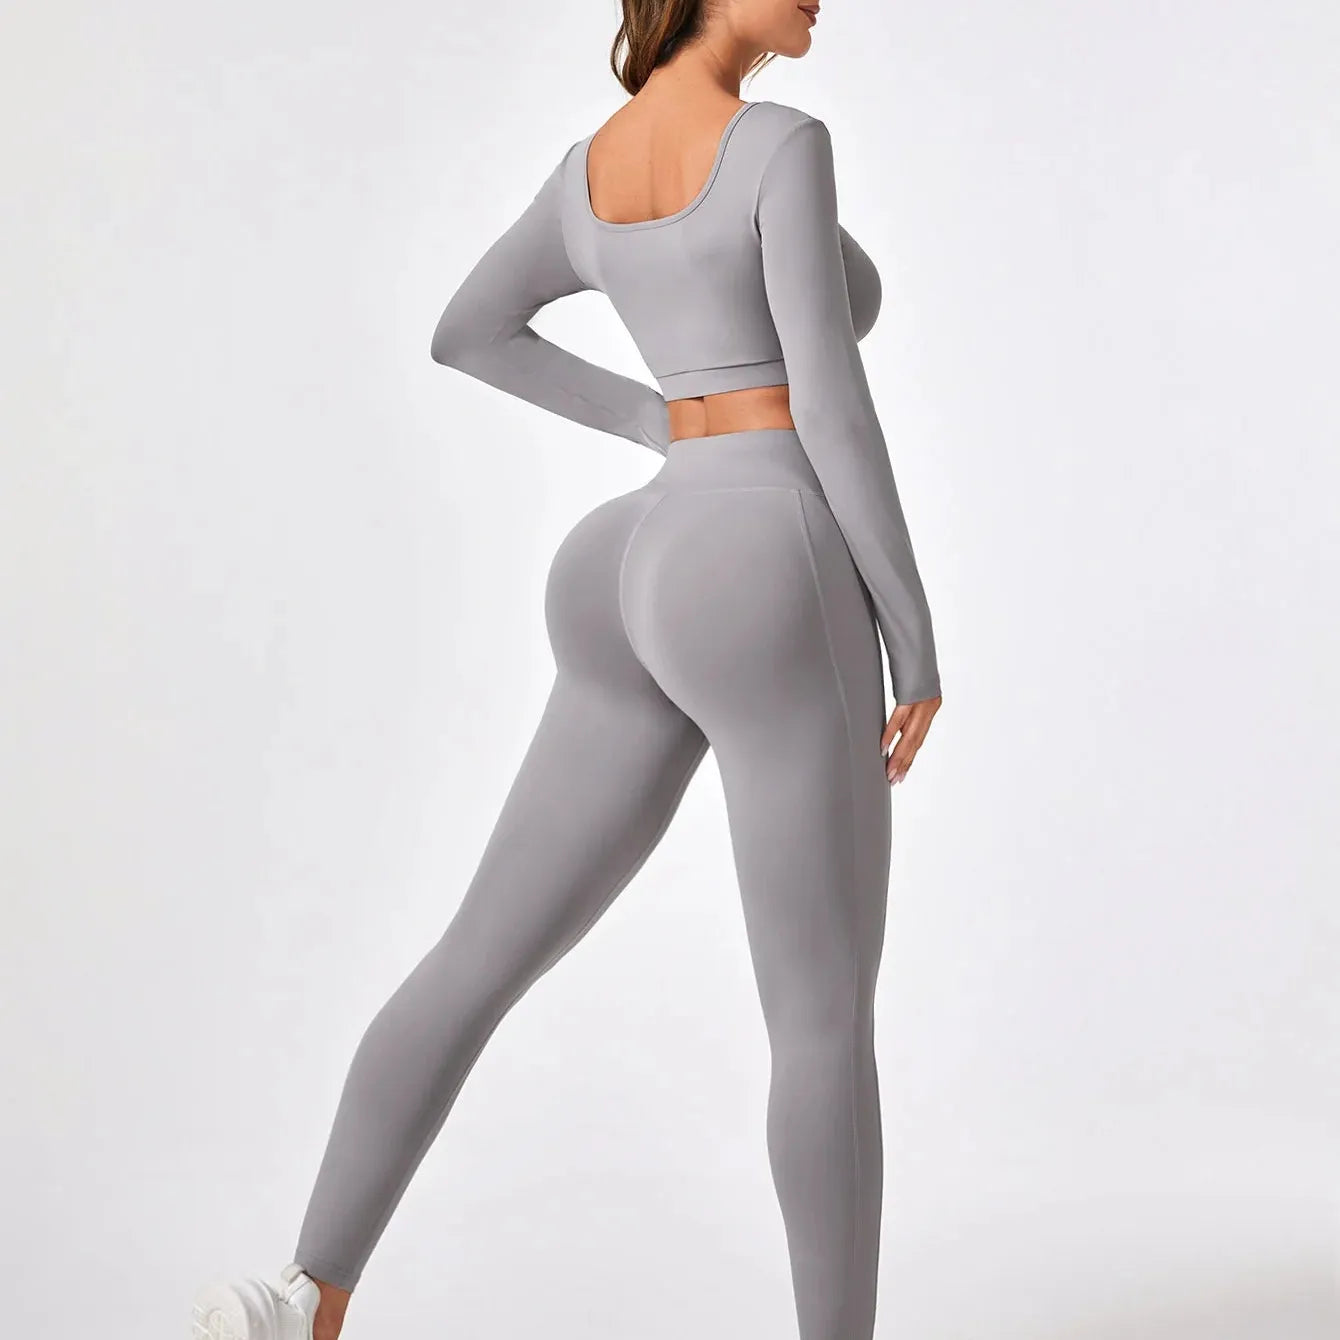 2 Pieces Long Sleeve Yoga Pilates Sports Suits Quick Dry Elastic Slim Fit Tracksuit Fitness Workout Breathable Activewear Set